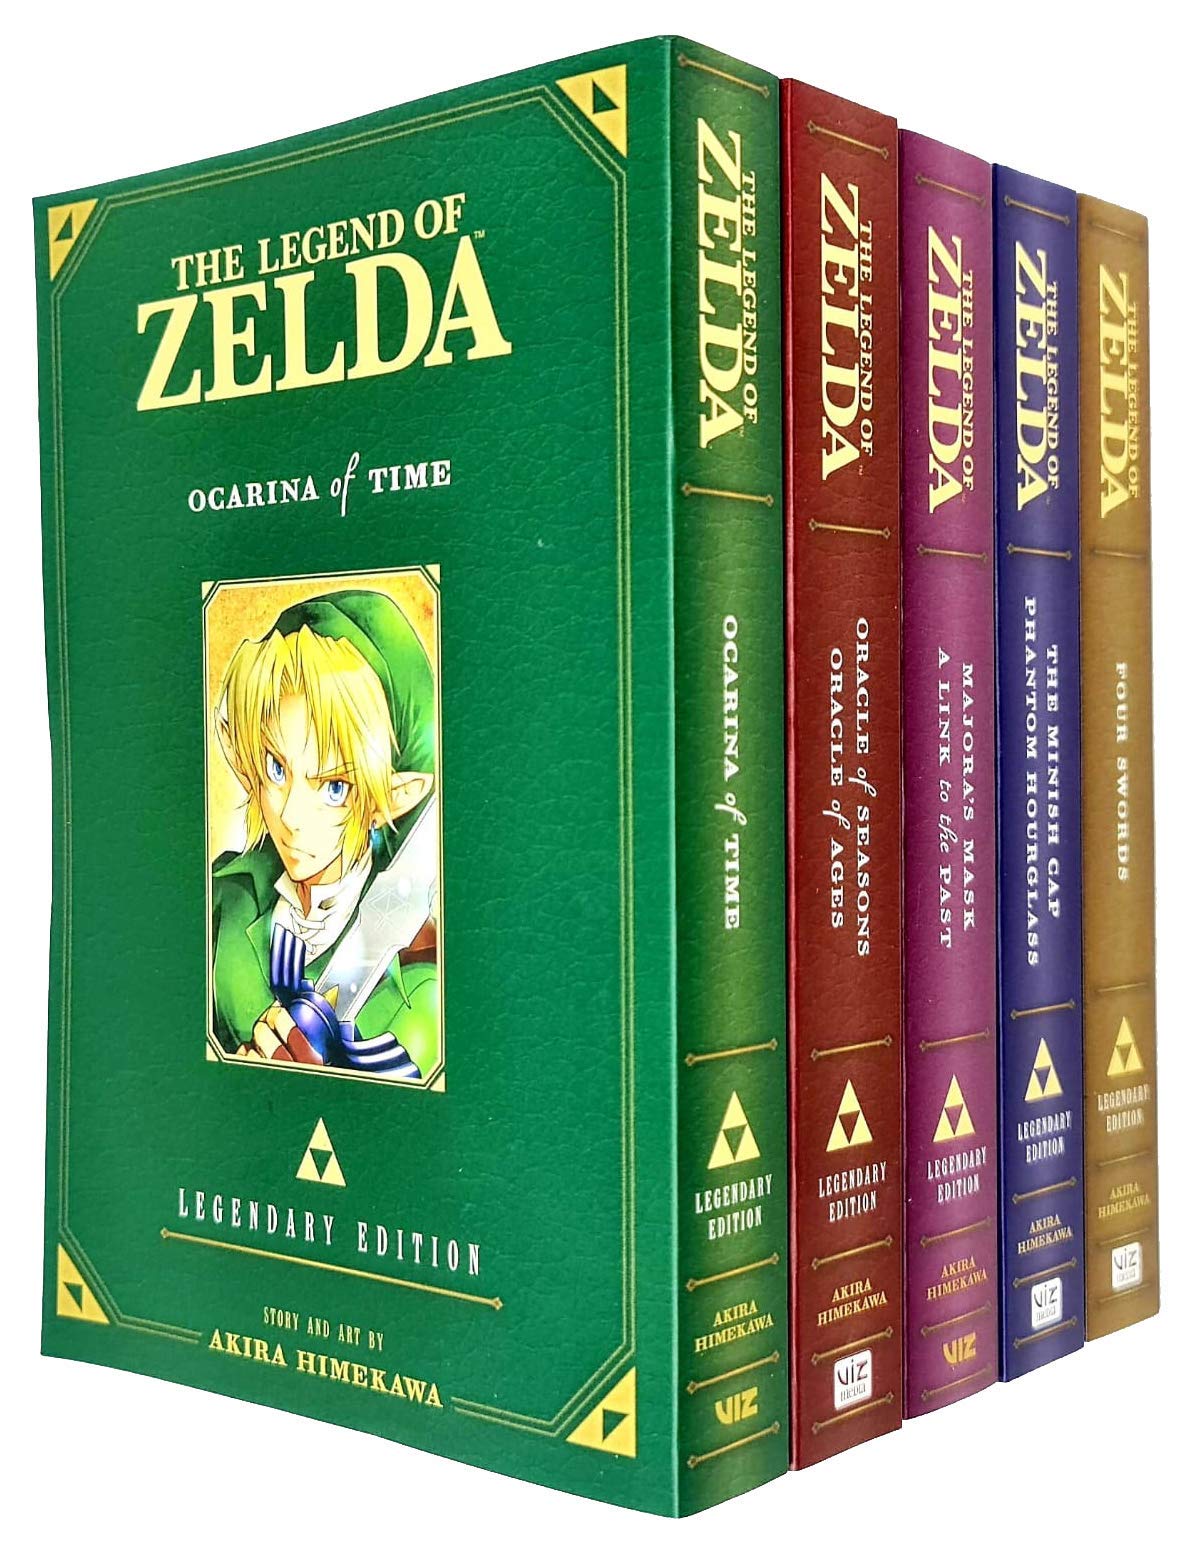 The Legend of Zelda Legendary Edition Collection